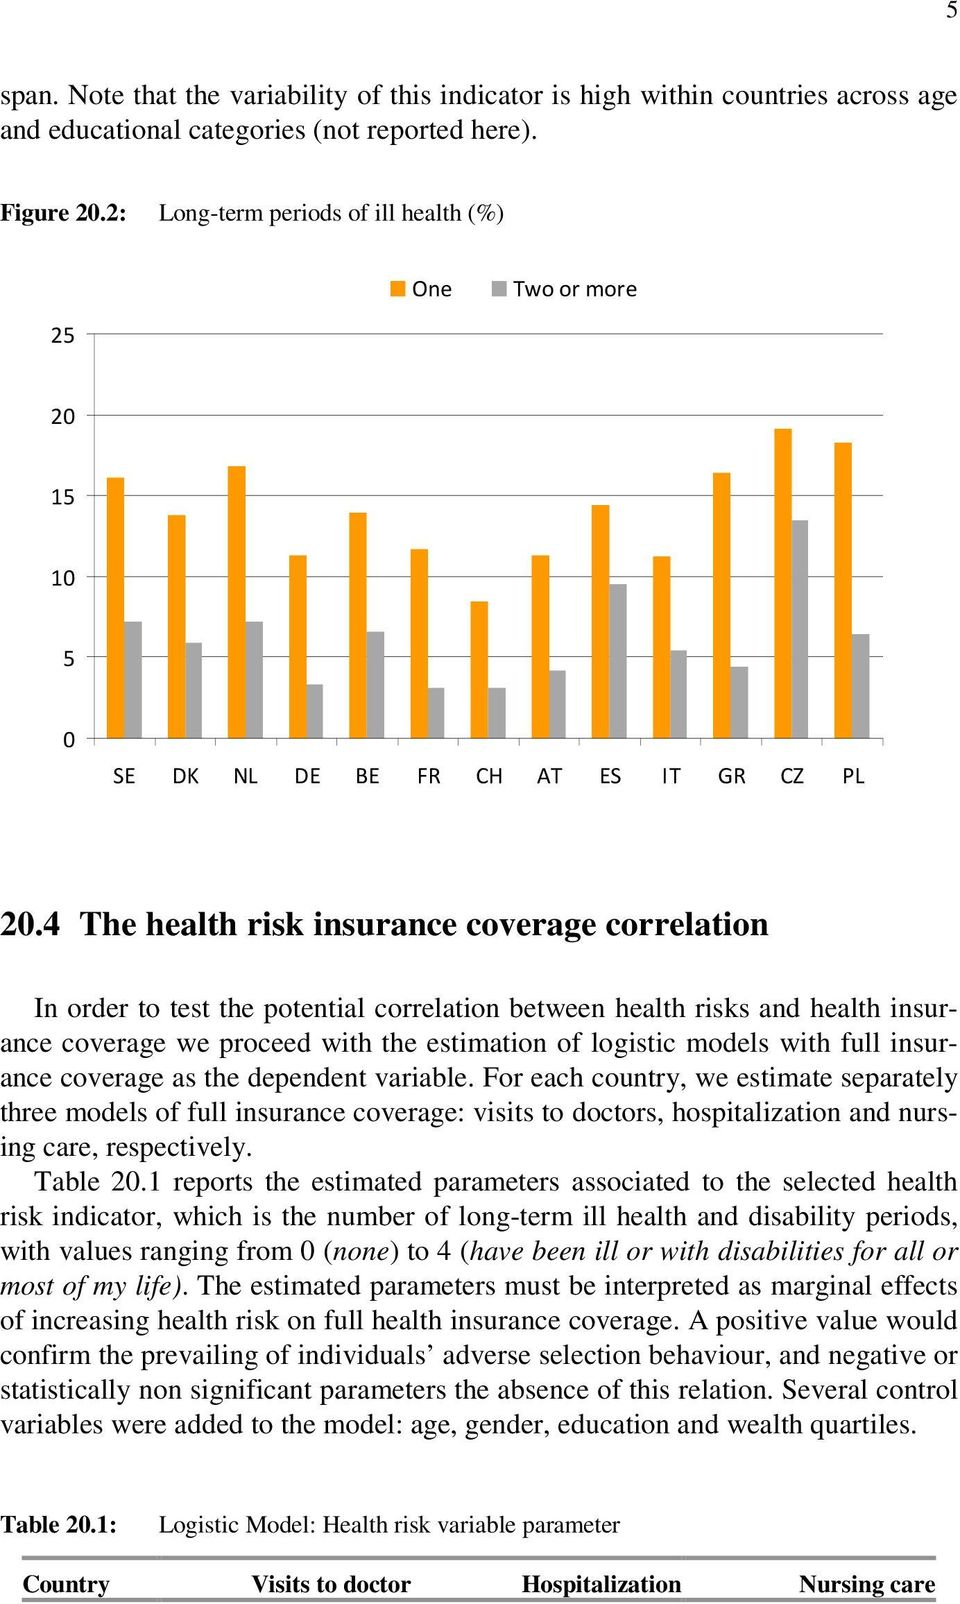 4 The health risk insurance coverage correlation In order to test the potential correlation between health risks and health insurance coverage we proceed with the estimation of logistic models with